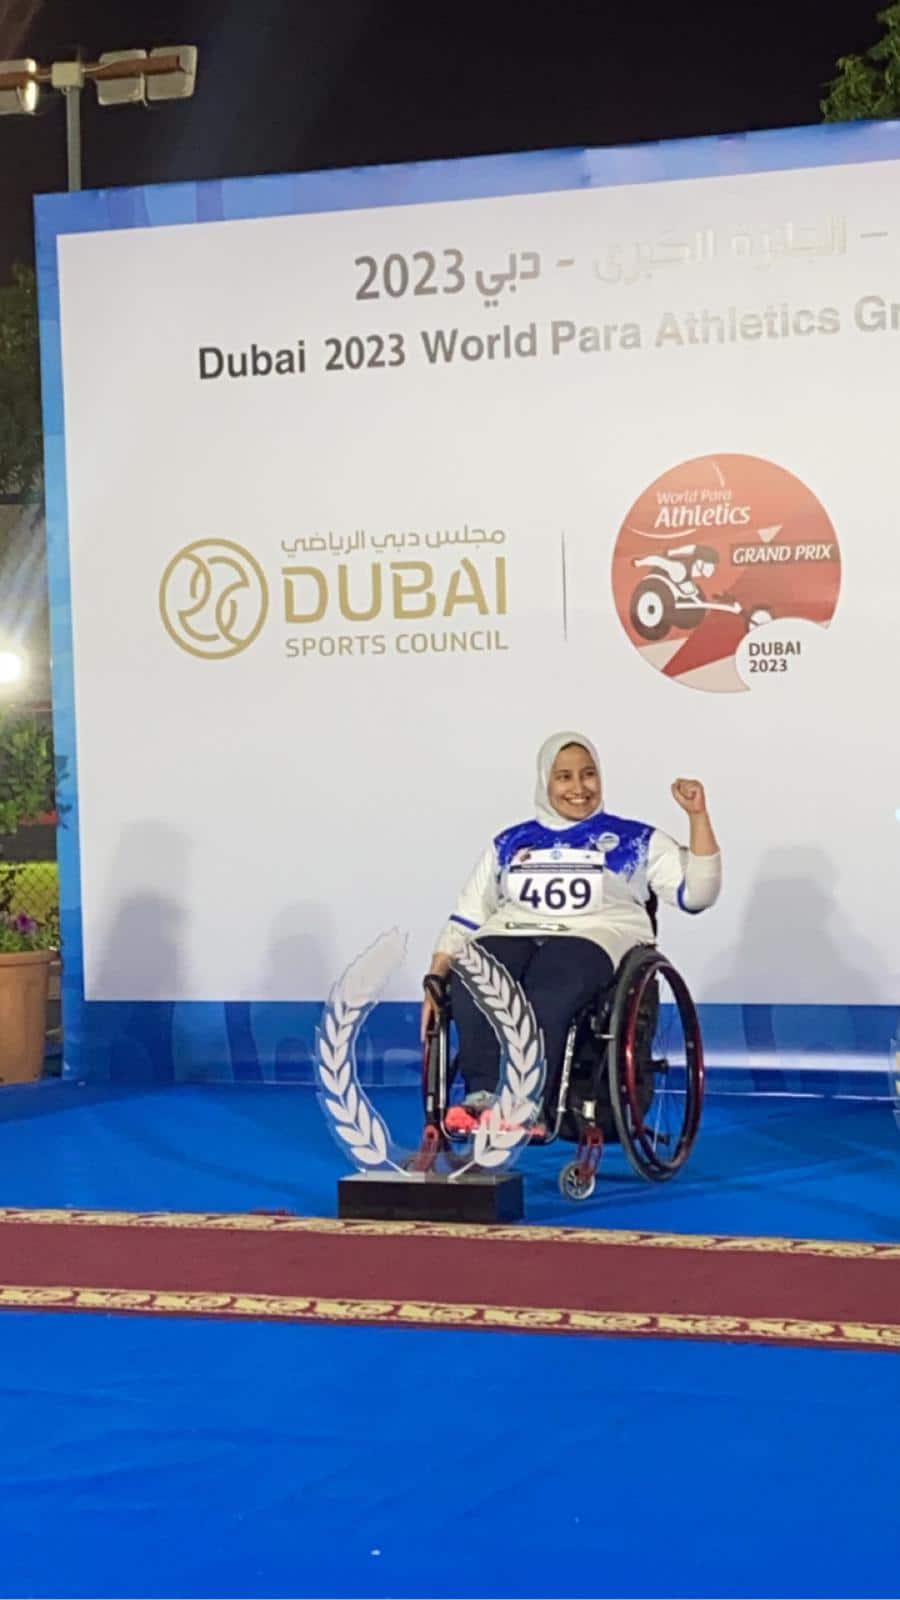 More wins for Kuwait athletes